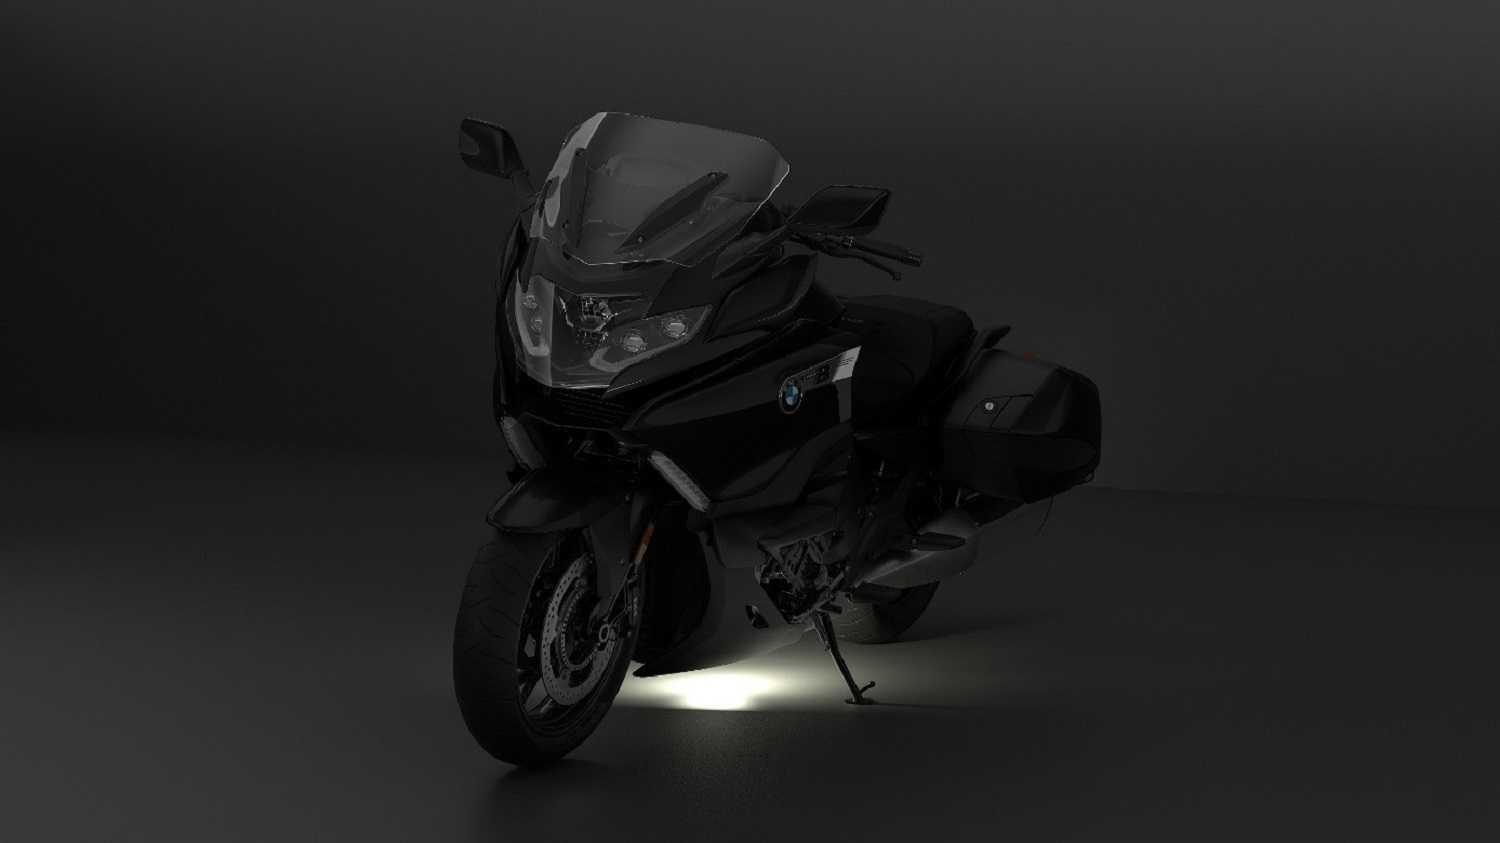 The new 2022 BMW K 1600 GT, GTL, B and Grand America.